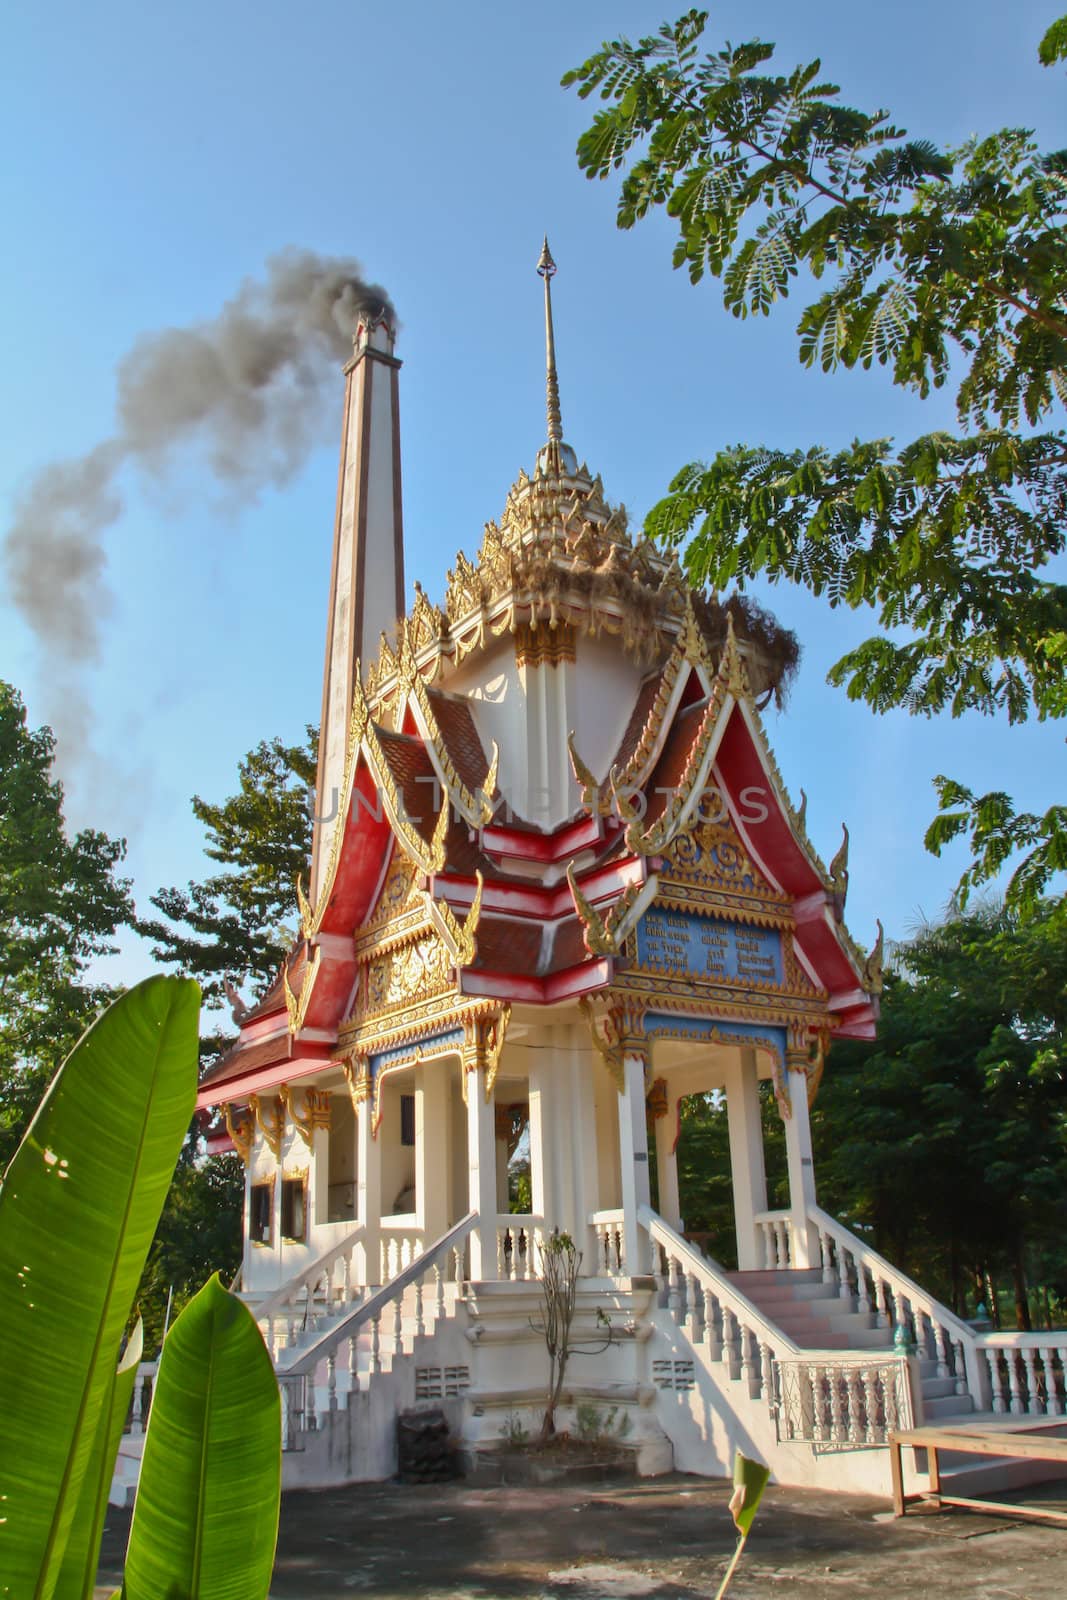 The cremation thai temple.